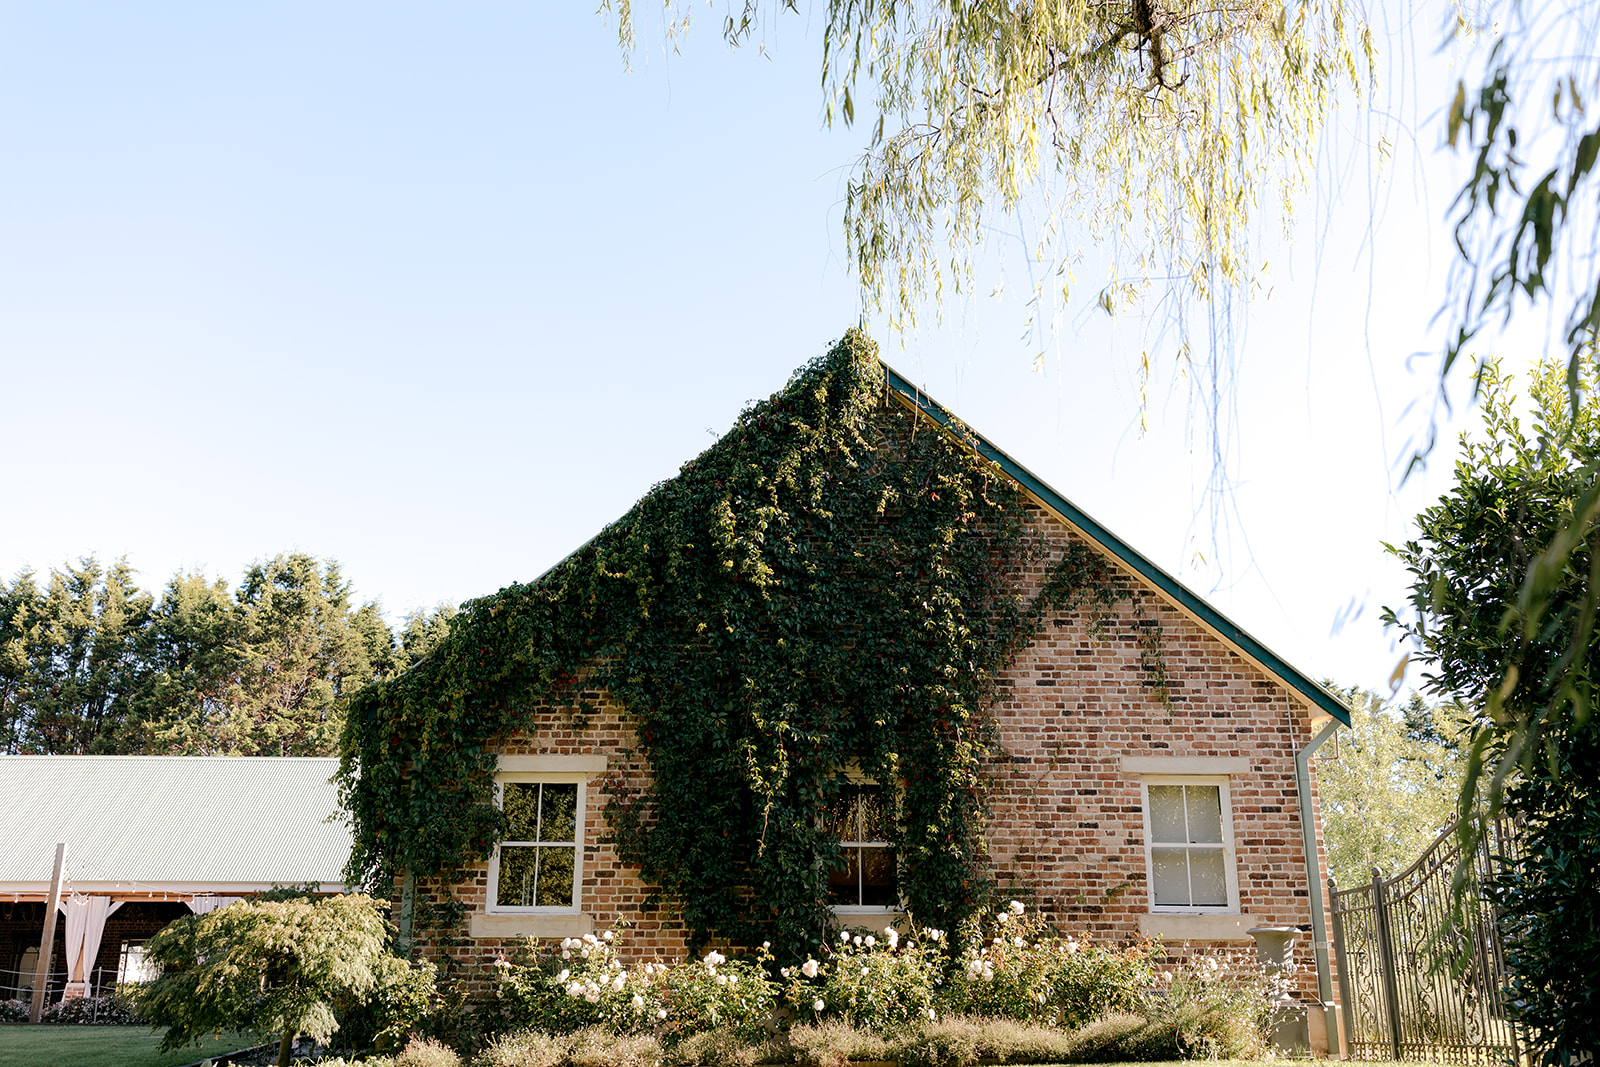 Montrose House is a romantic & elegant country wedding venue in the Southern Highlands.